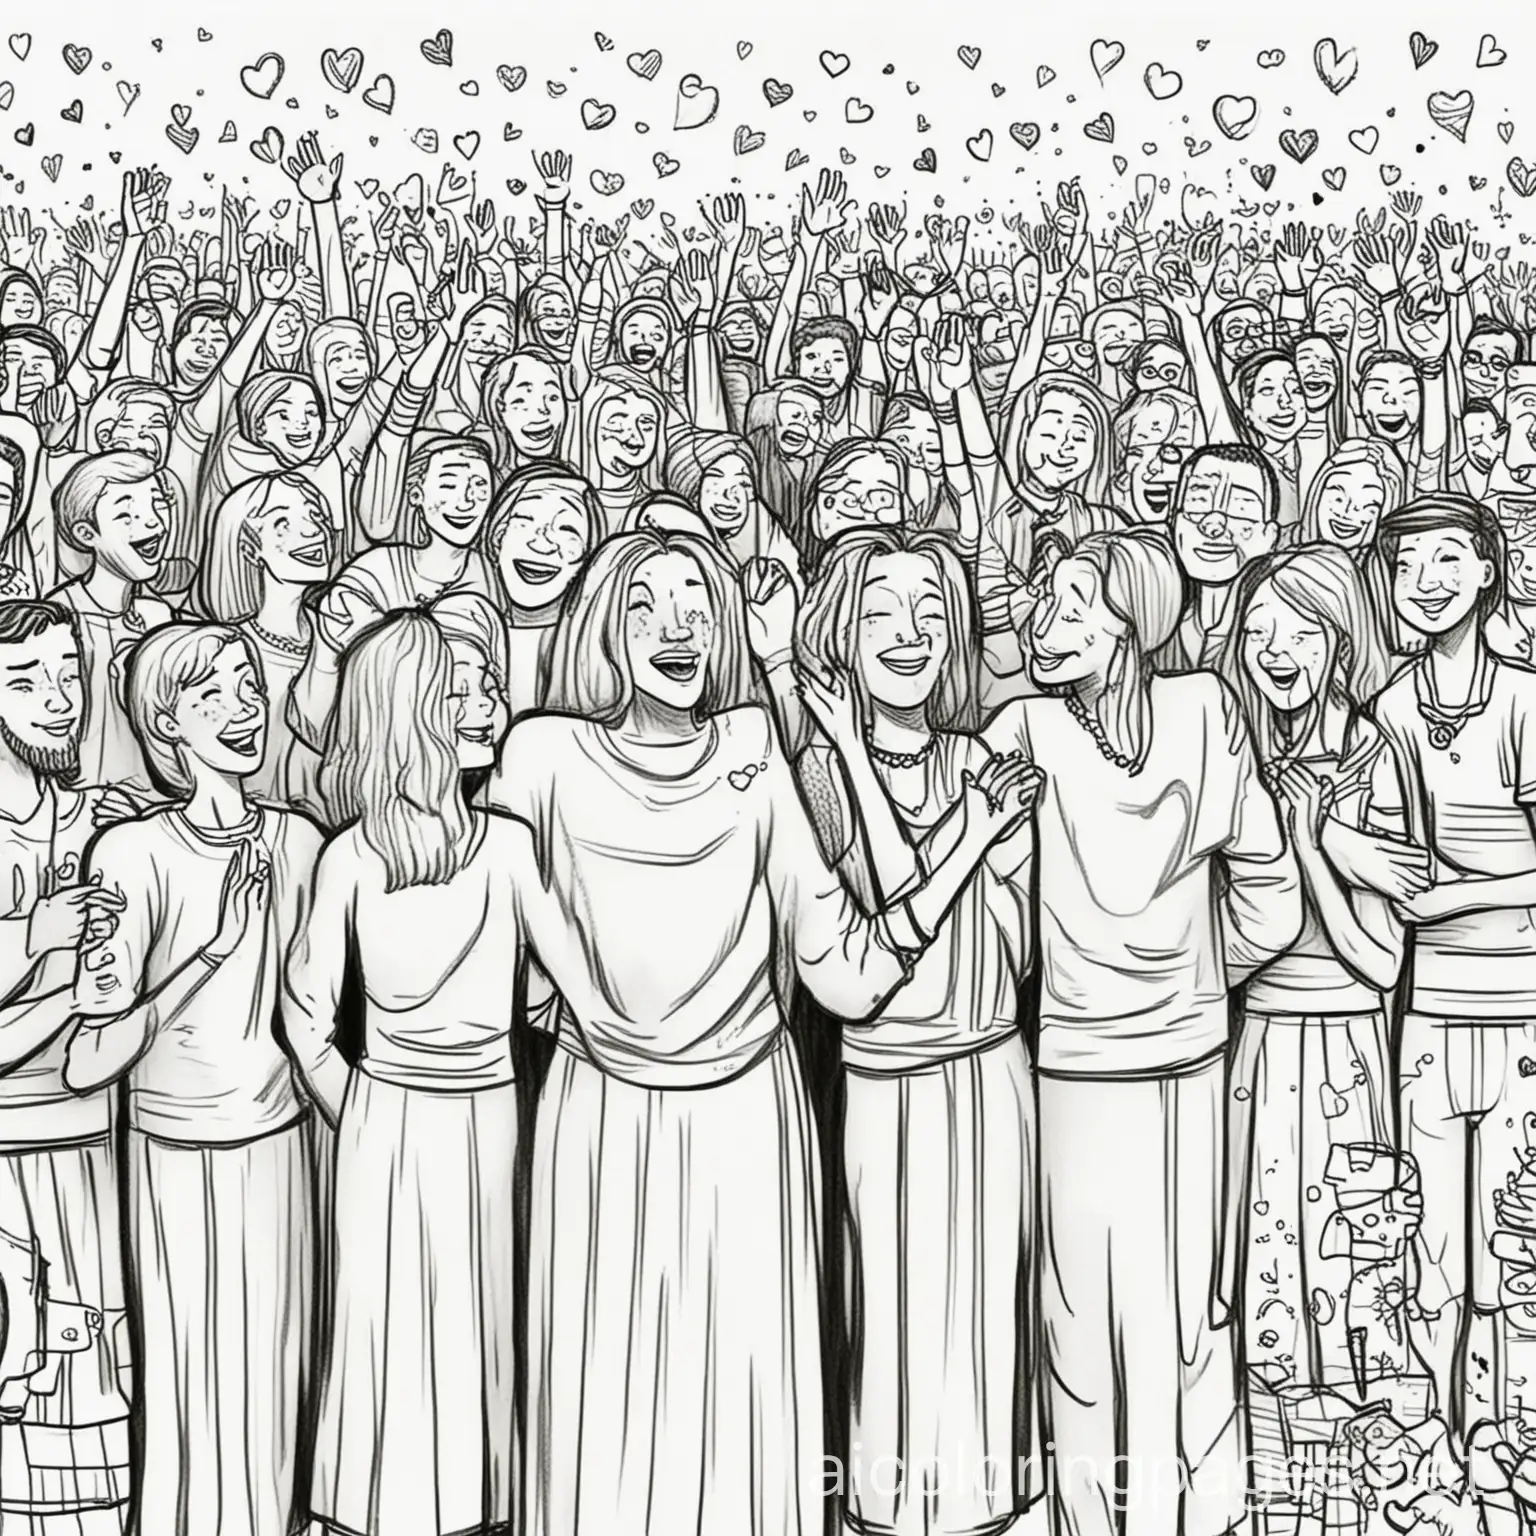 community of people celebrating love and happiness, Coloring Page, black and white, line art, white background, Simplicity, Ample White Space. The background of the coloring page is plain white to make it easy for young children to color within the lines. The outlines of all the subjects are easy to distinguish, making it simple for kids to color without too much difficulty